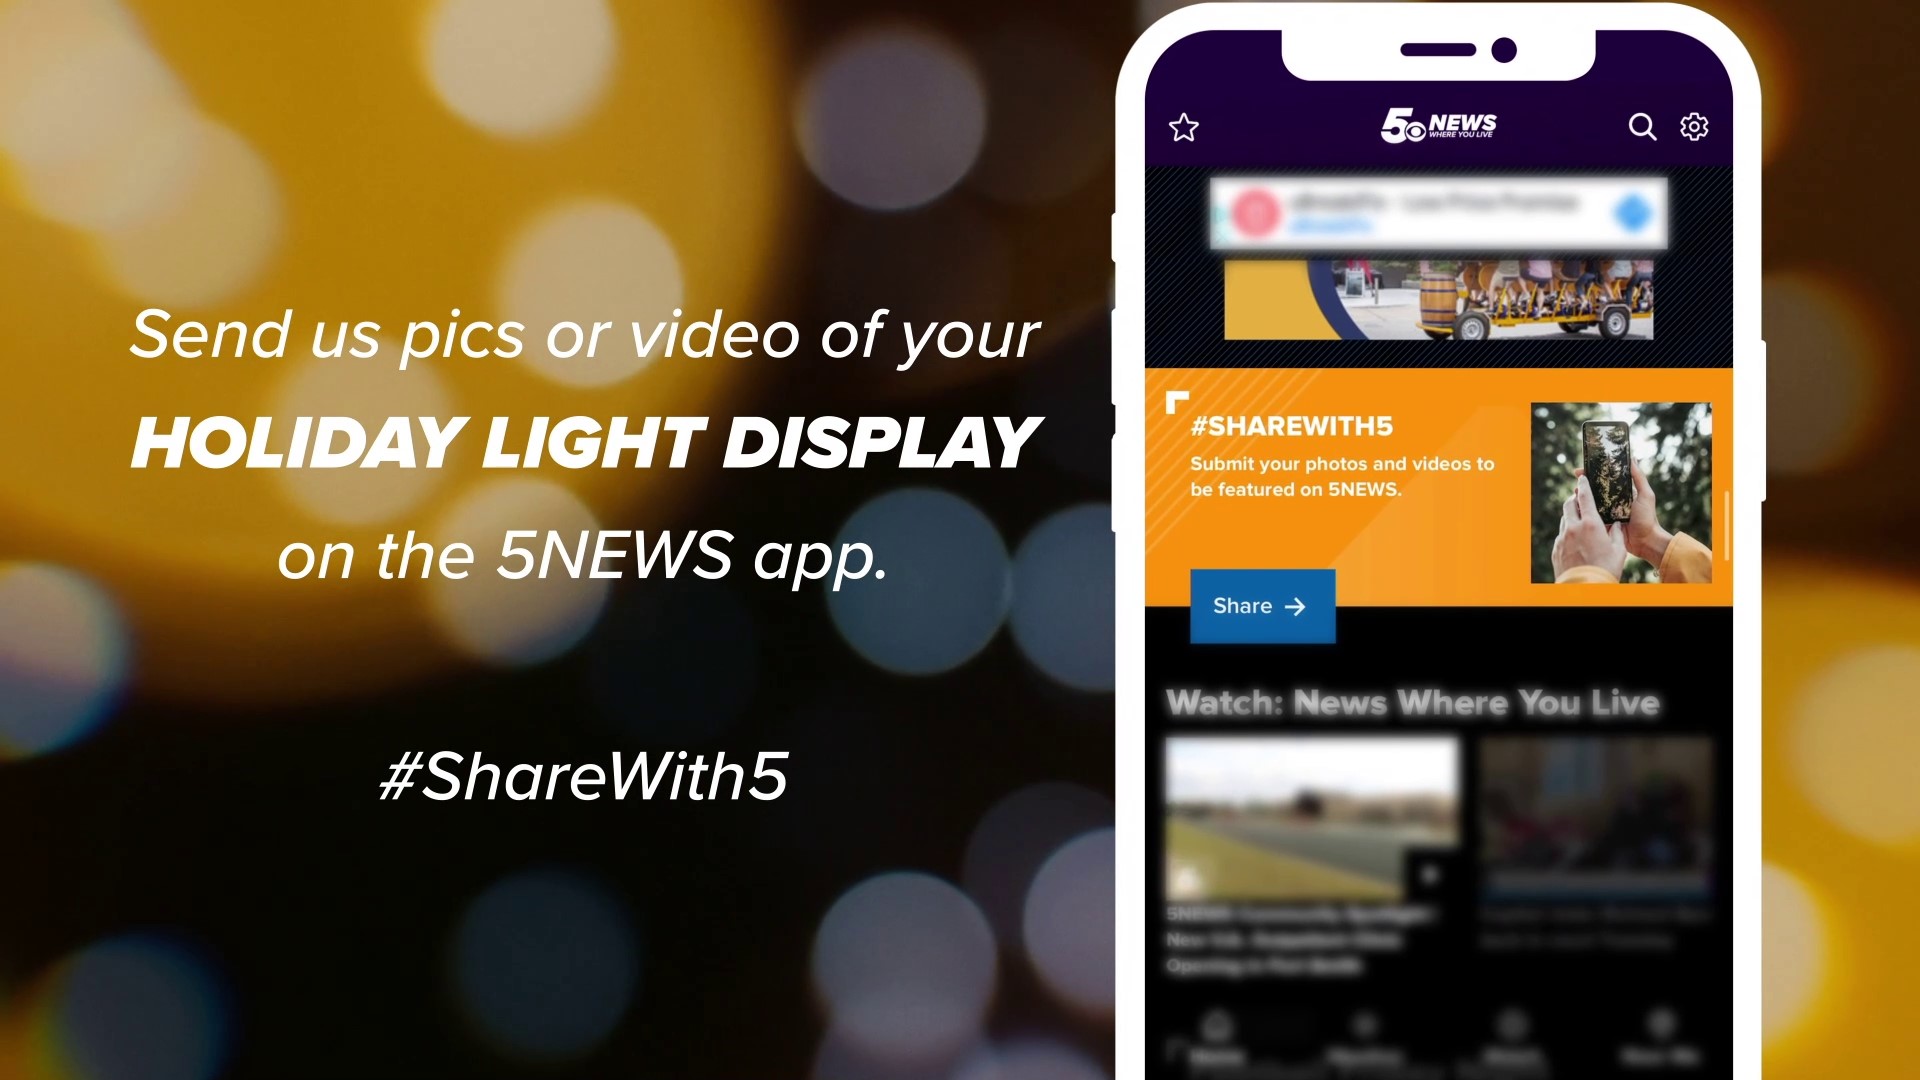 Share your holiday lights photos with us for a chance to have your photos shared on-air and online.